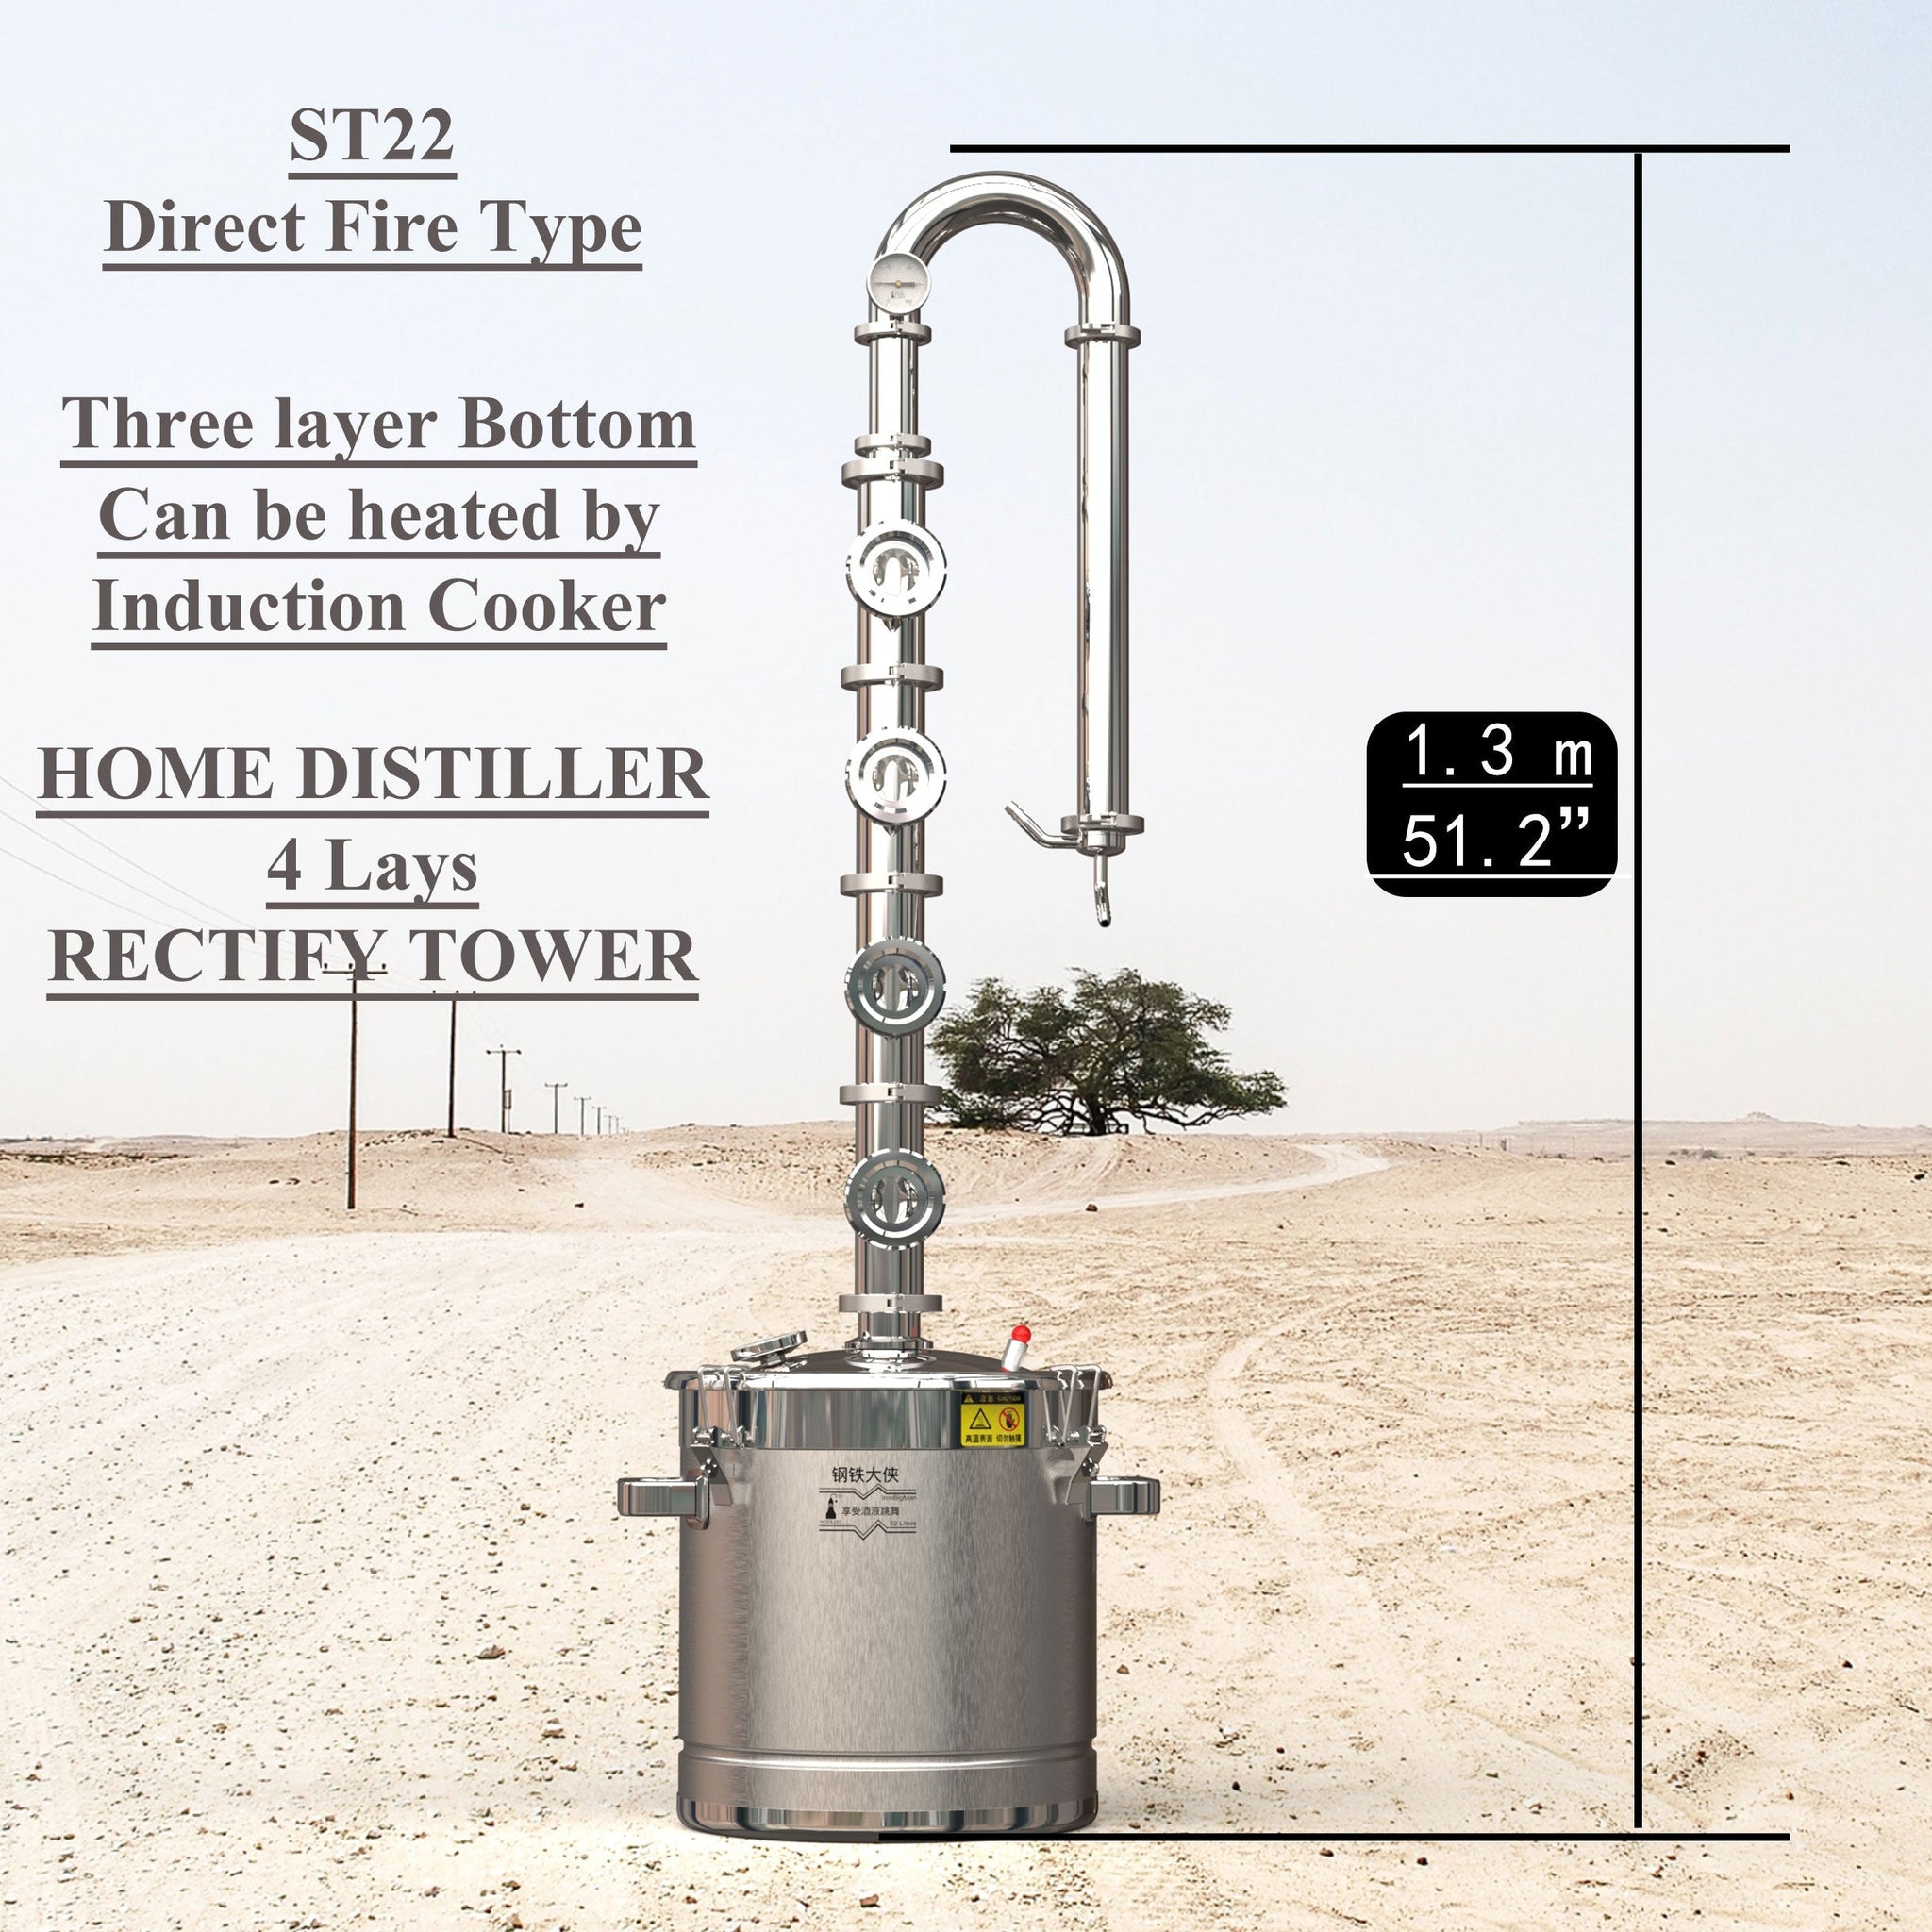 22L Stainless Steel Distiller(ST22) 【Free shipping worldwide!】 - Hooloo Distilling Equipment Supply